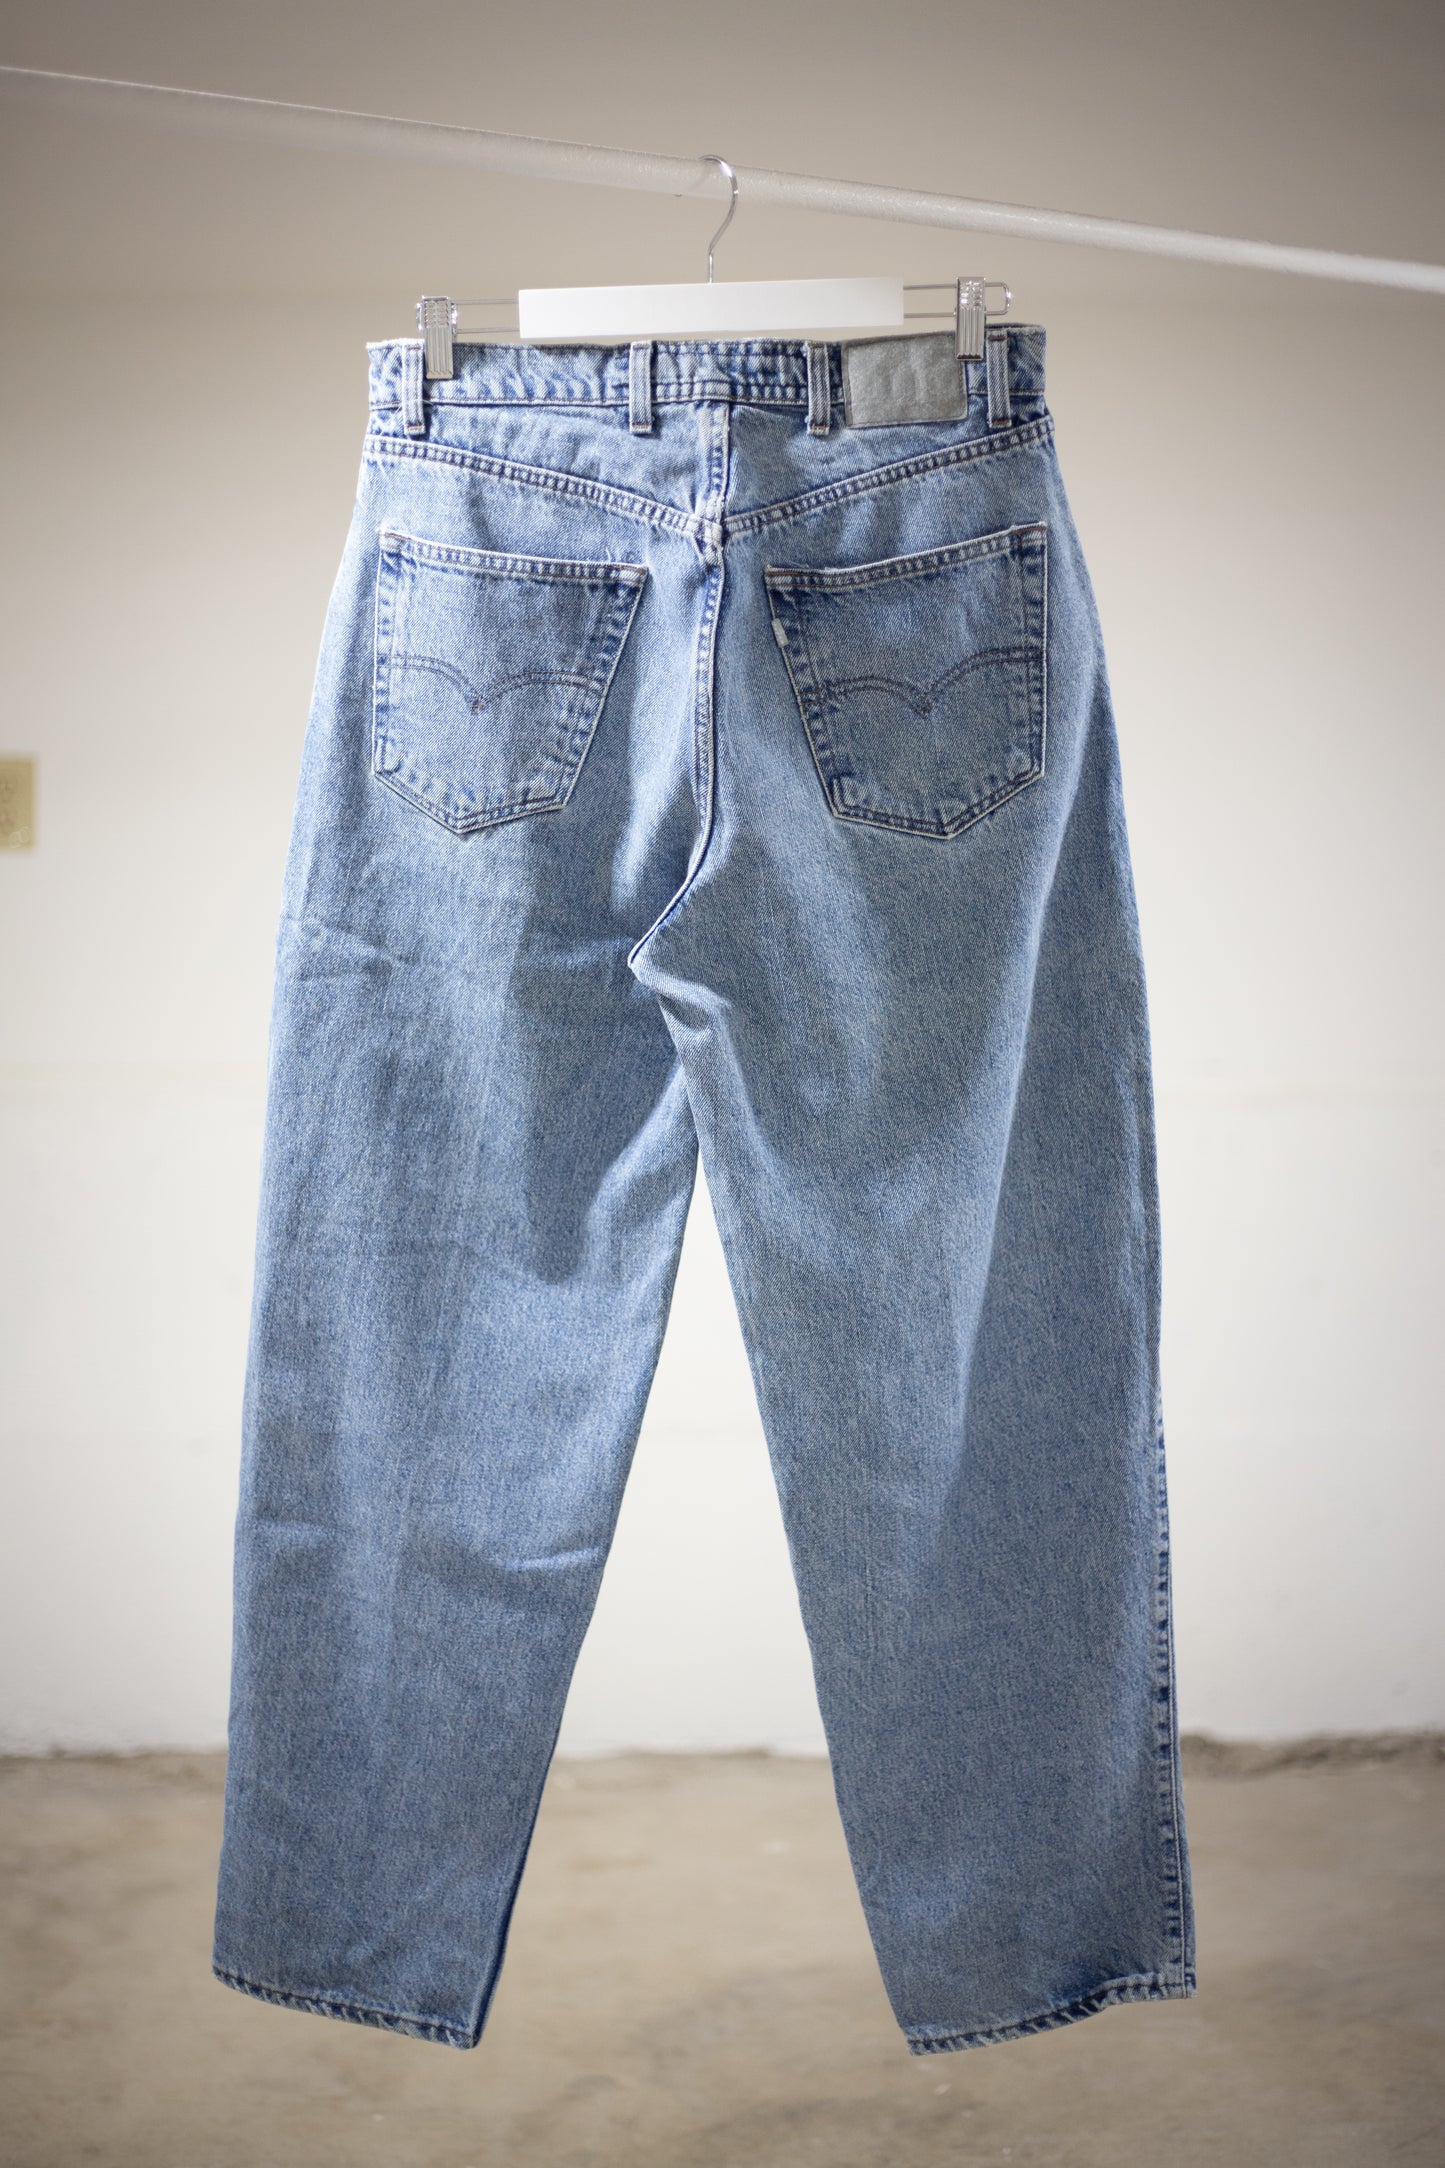 90's Levi's SilverTab (954 0593) Baggy Jeans